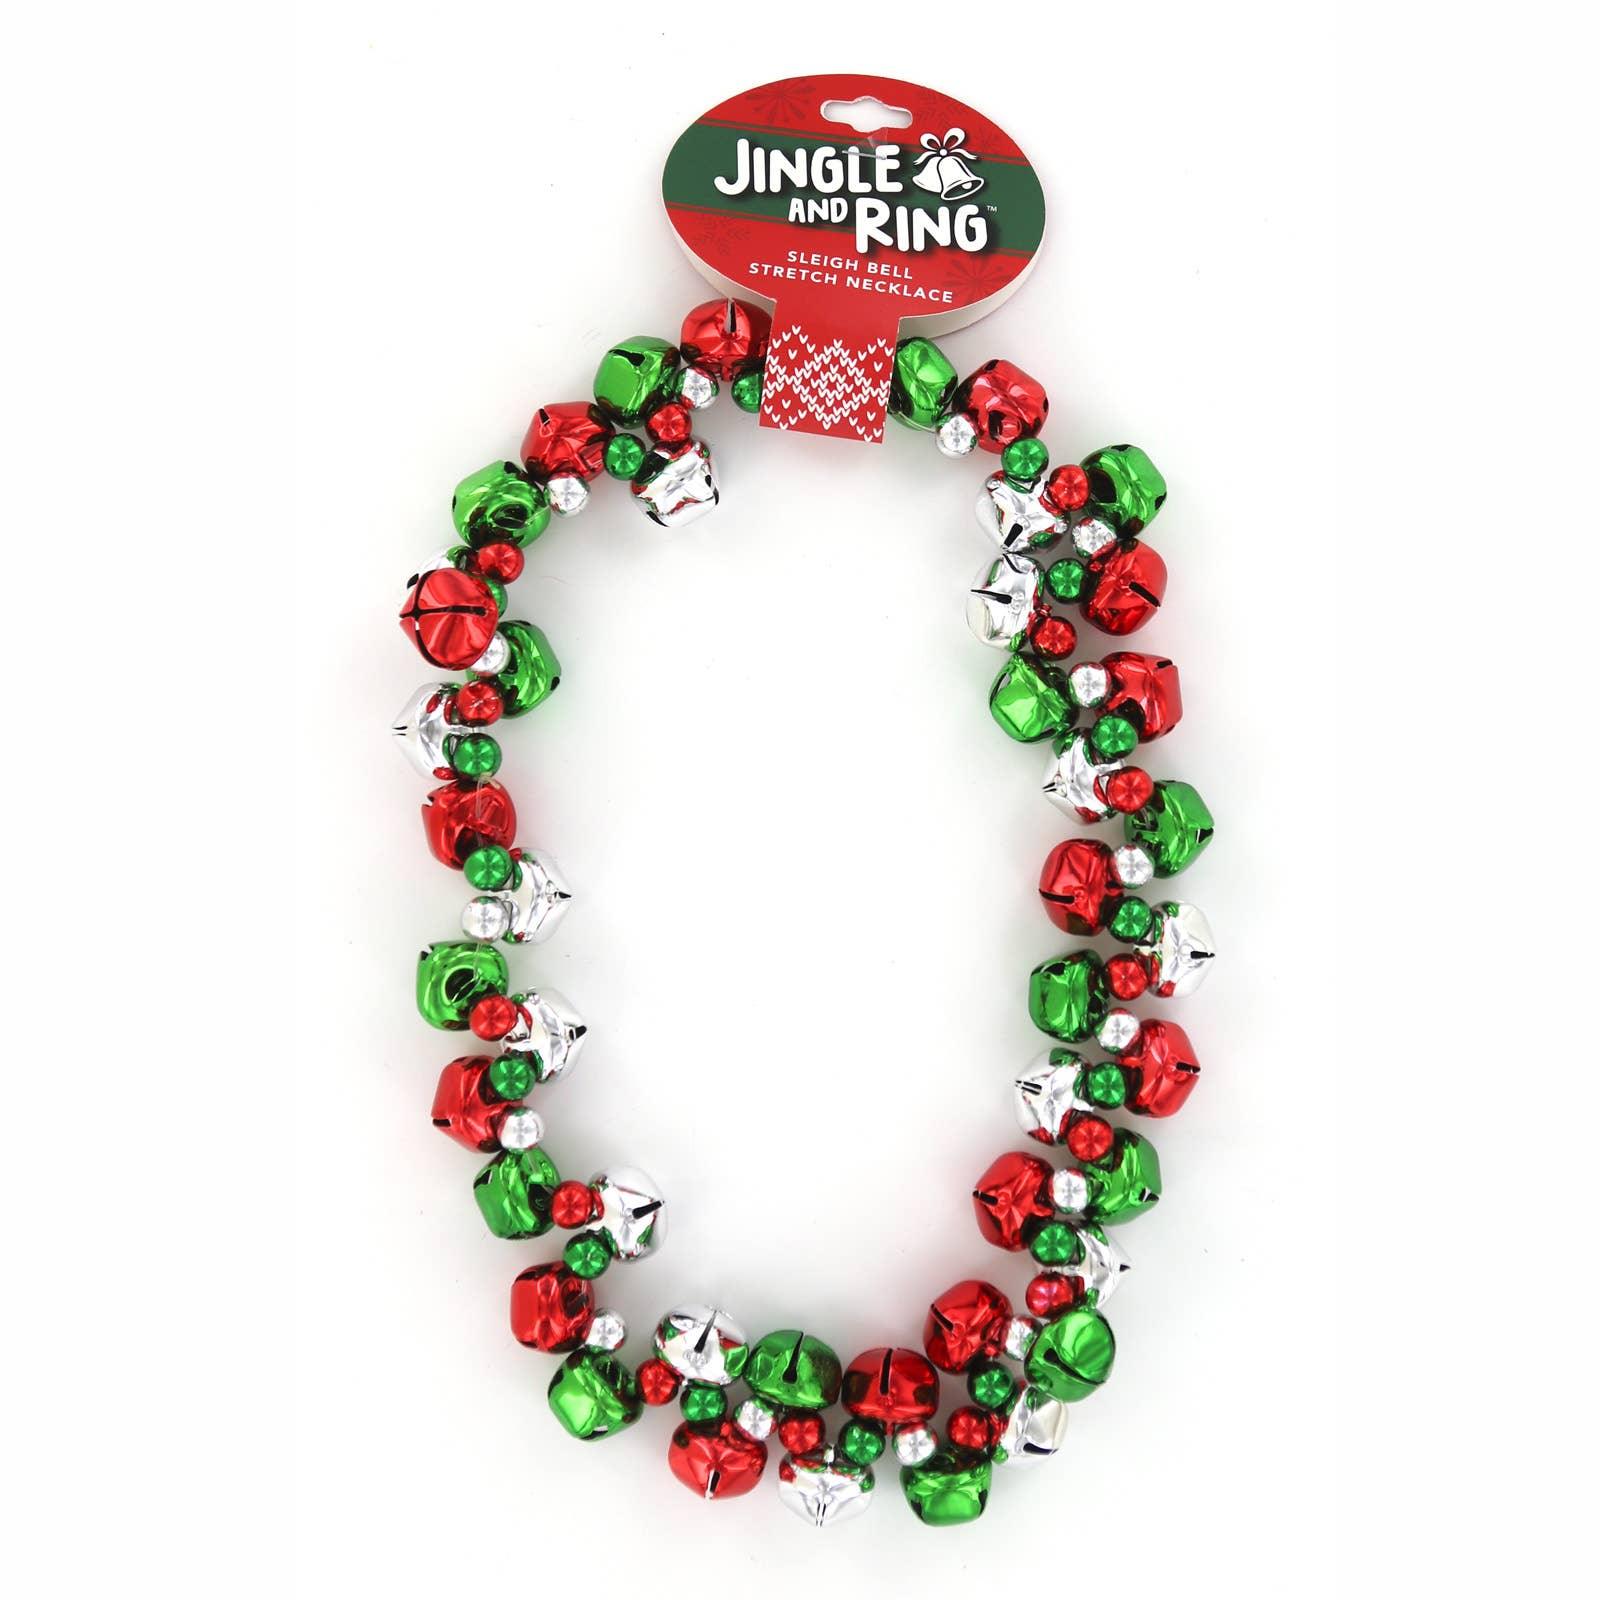 Jingle & Ring Sleigh Bell Stretch Necklace - McCabe's Costumes